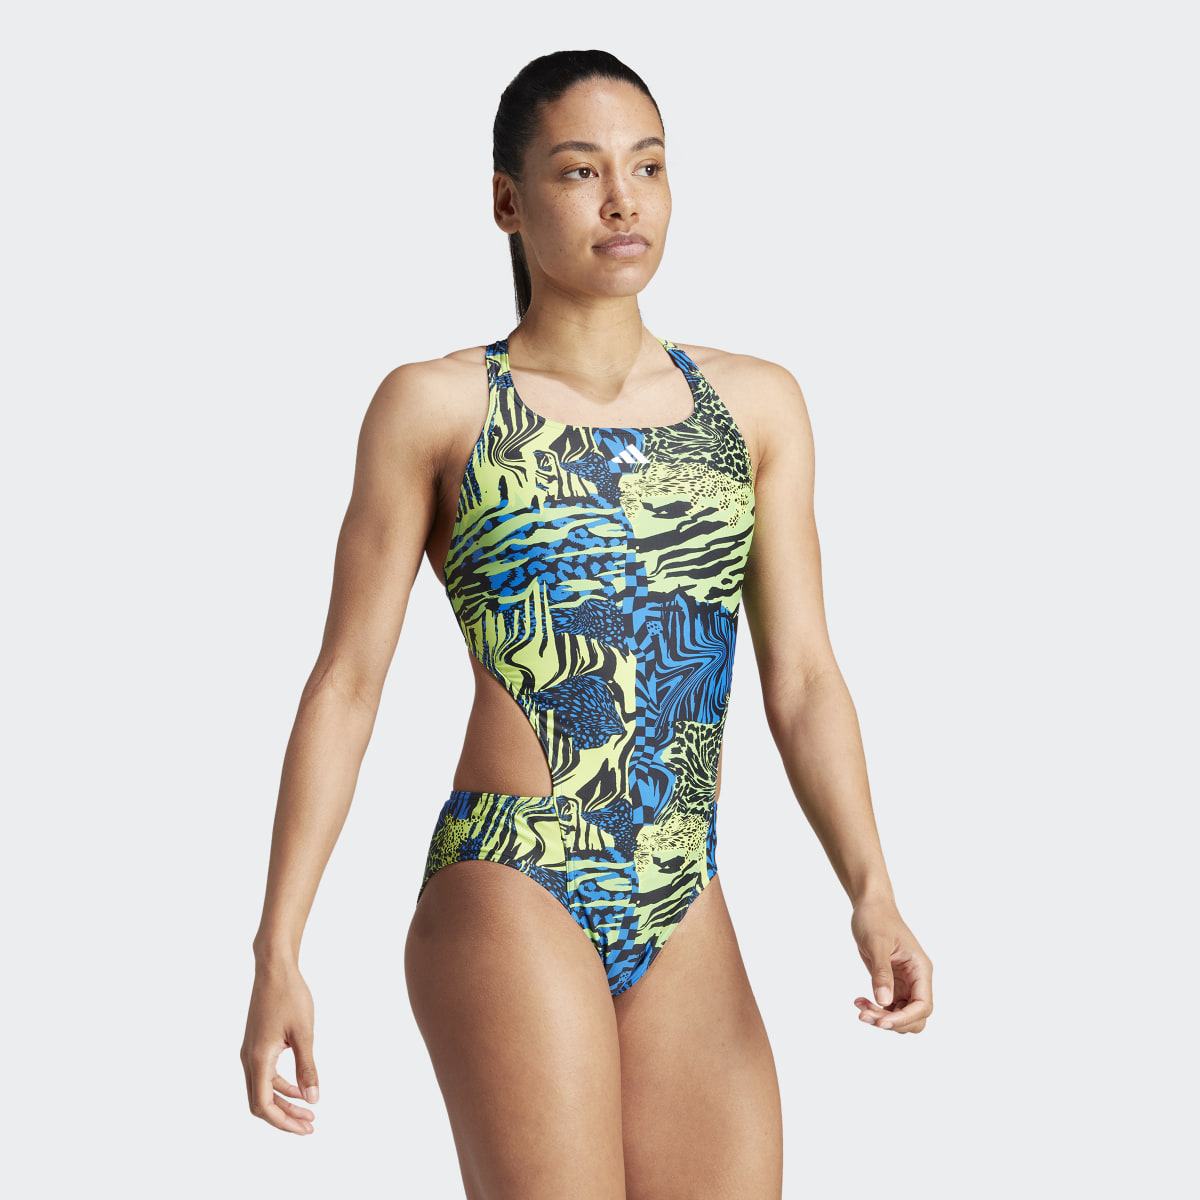 Adidas Allover Graphic Swimsuit. 4